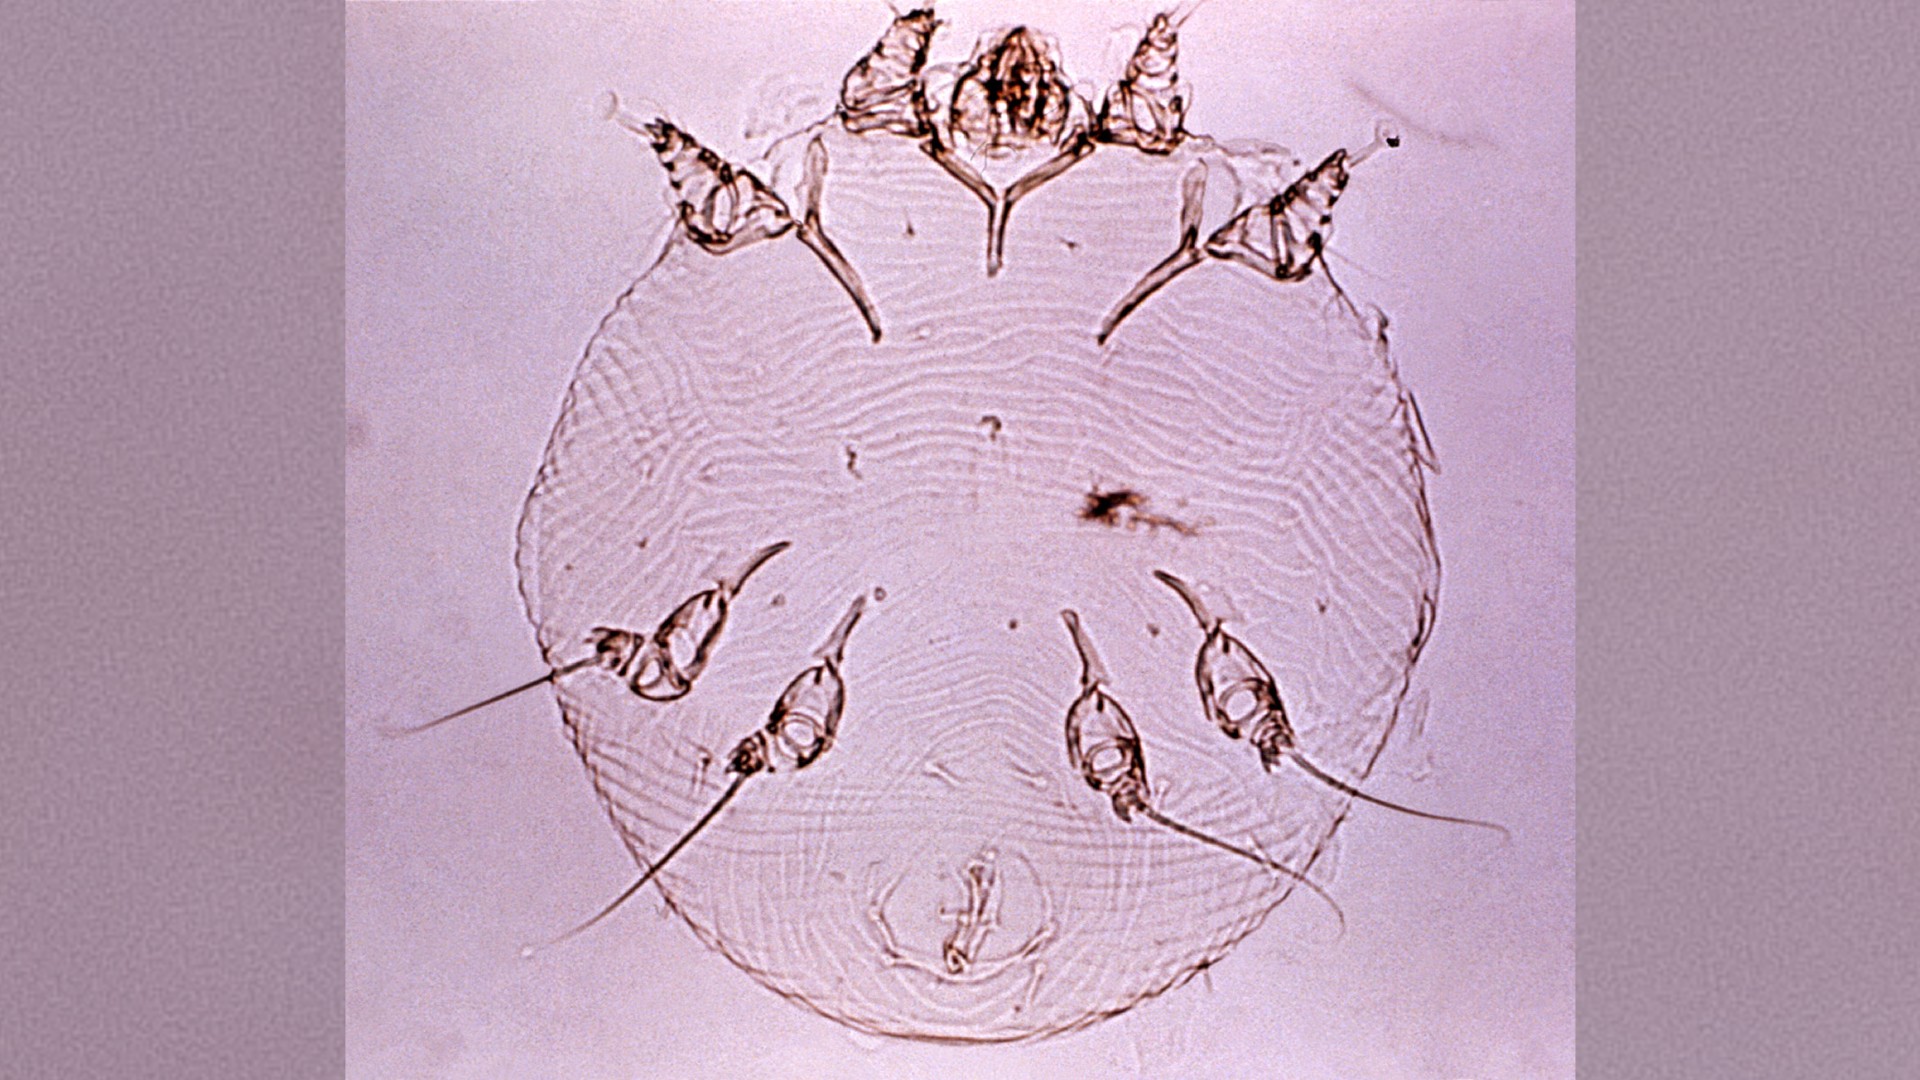 A photo of a scabies mite.